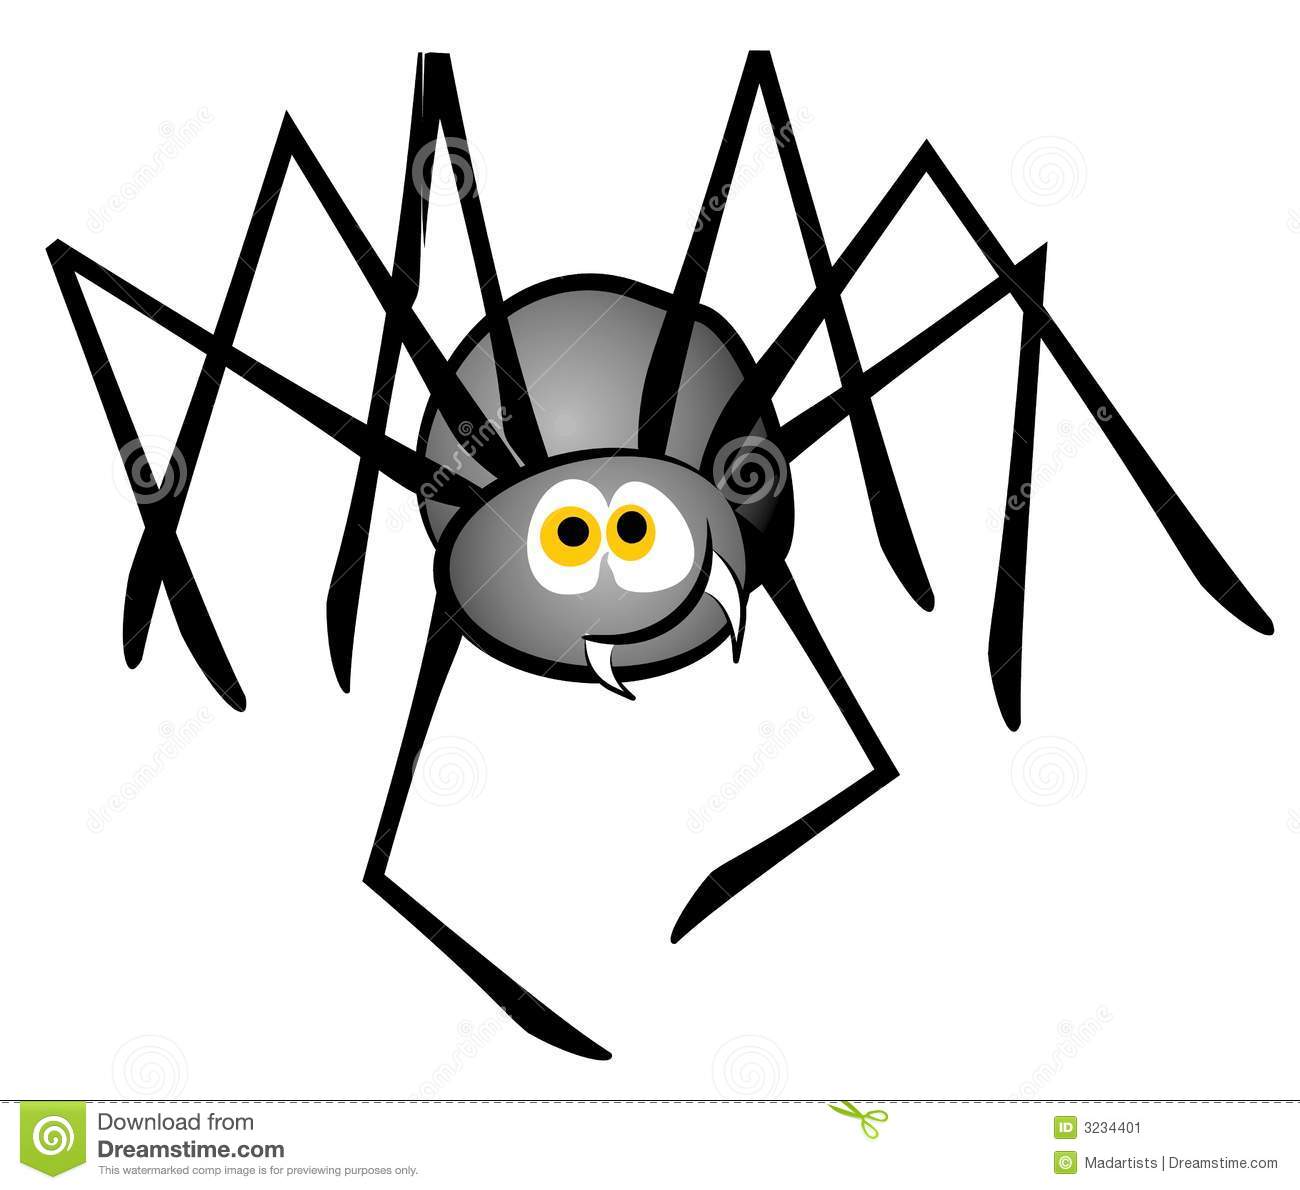 Clip Art Illustration Of A Cartoon Spider In Grey And Black With A